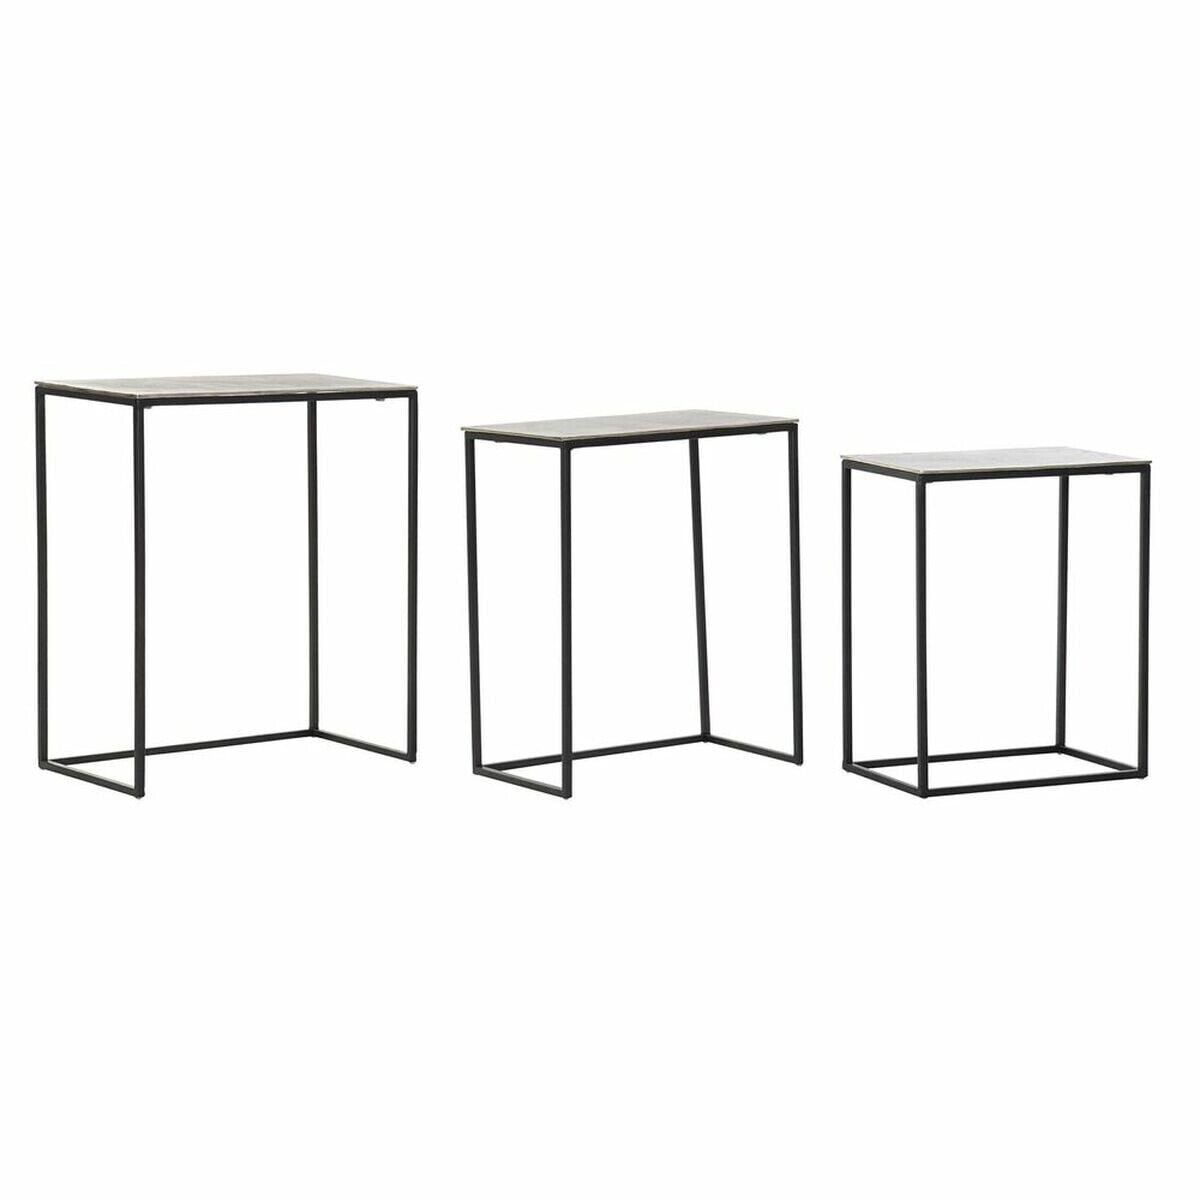 Set of 3 small tables DKD Home Decor Black Silver 50,5 x 28,5 x 59 cm